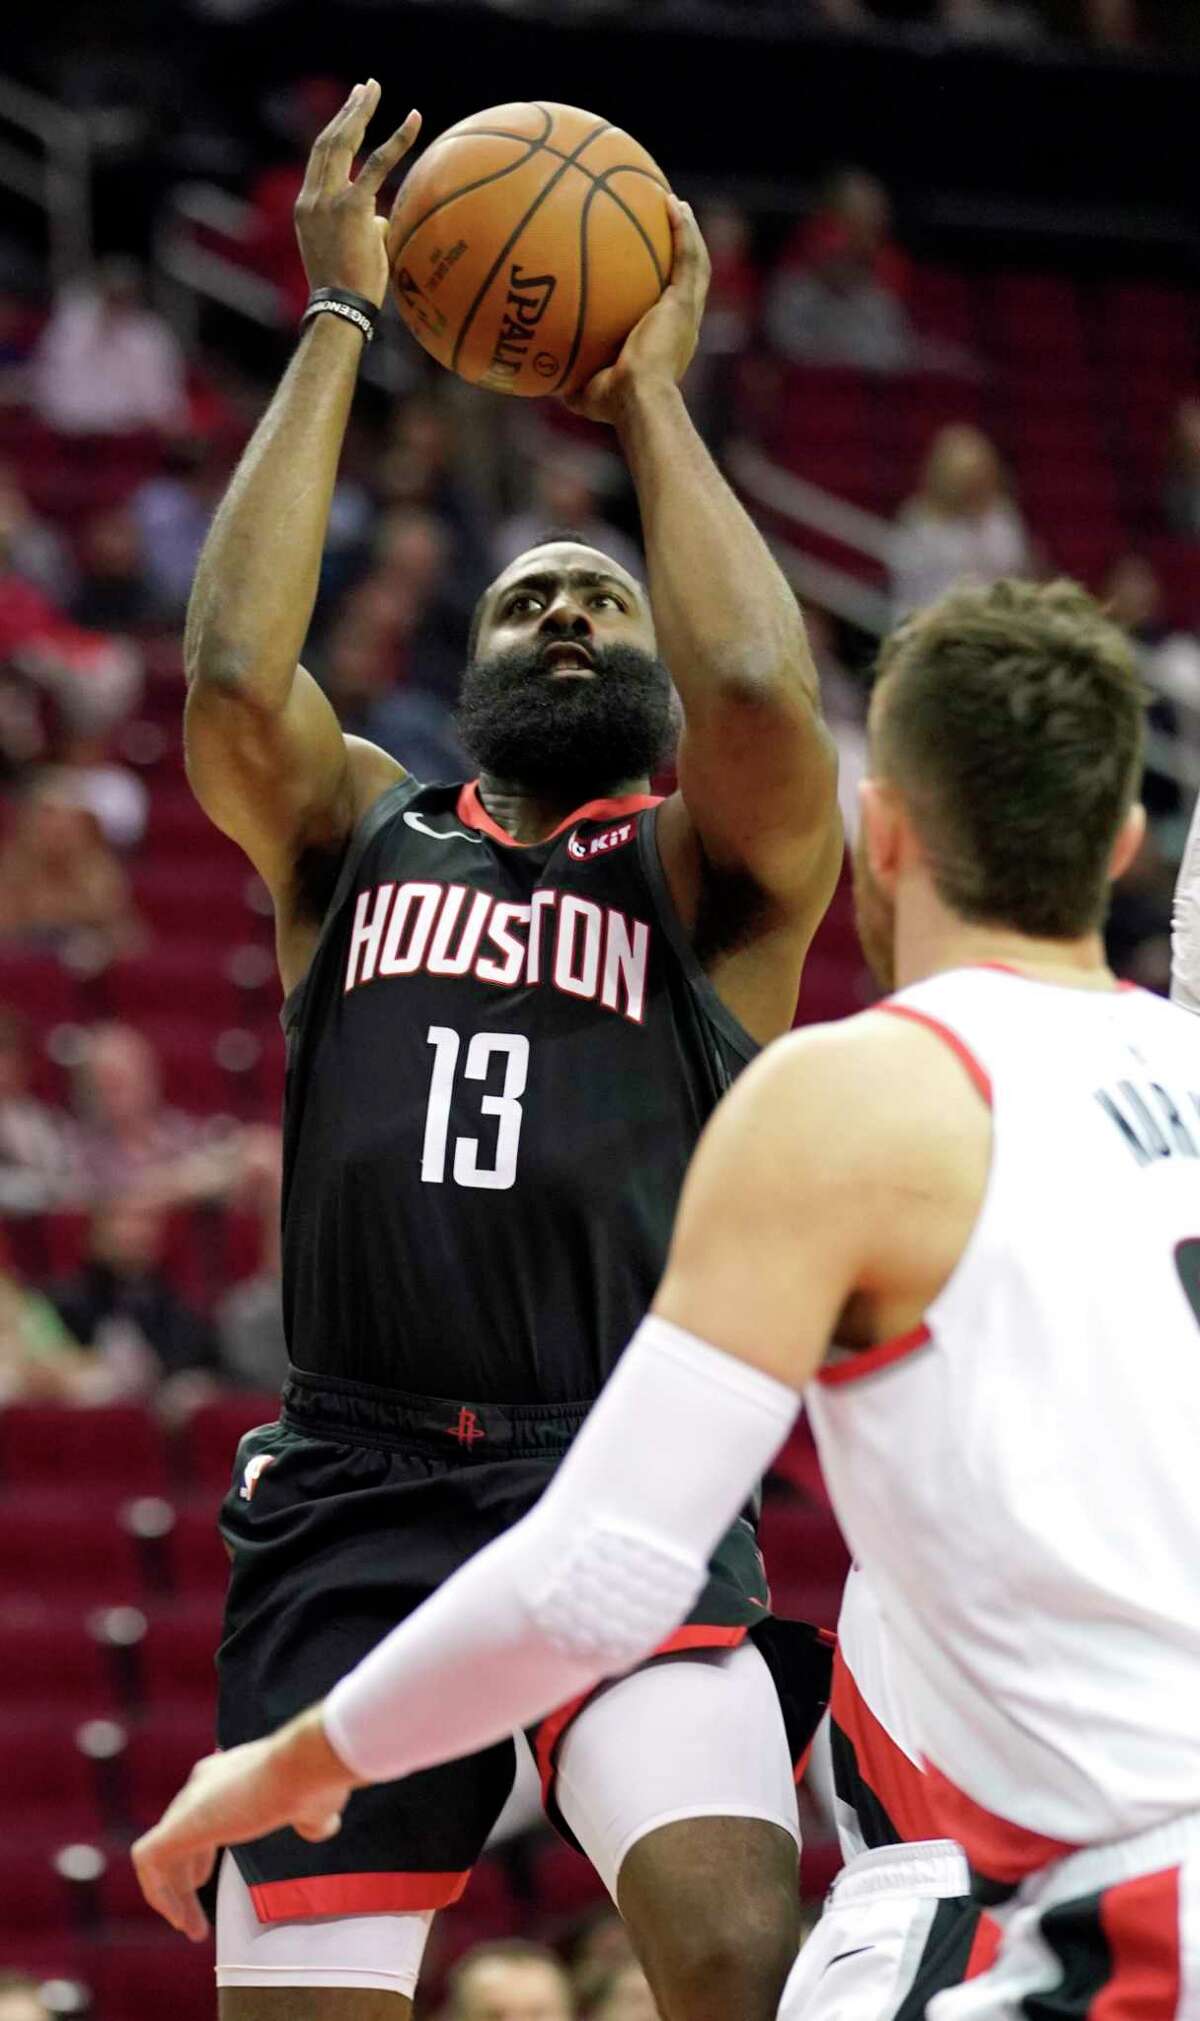 Houston Rockets' James Harden (13) shoots against the Portland Trail Blazers during the first half of an NBA basketball game Tuesday, Dec. 11, 2018, in Houston. (AP Photo/David J. Phillip)